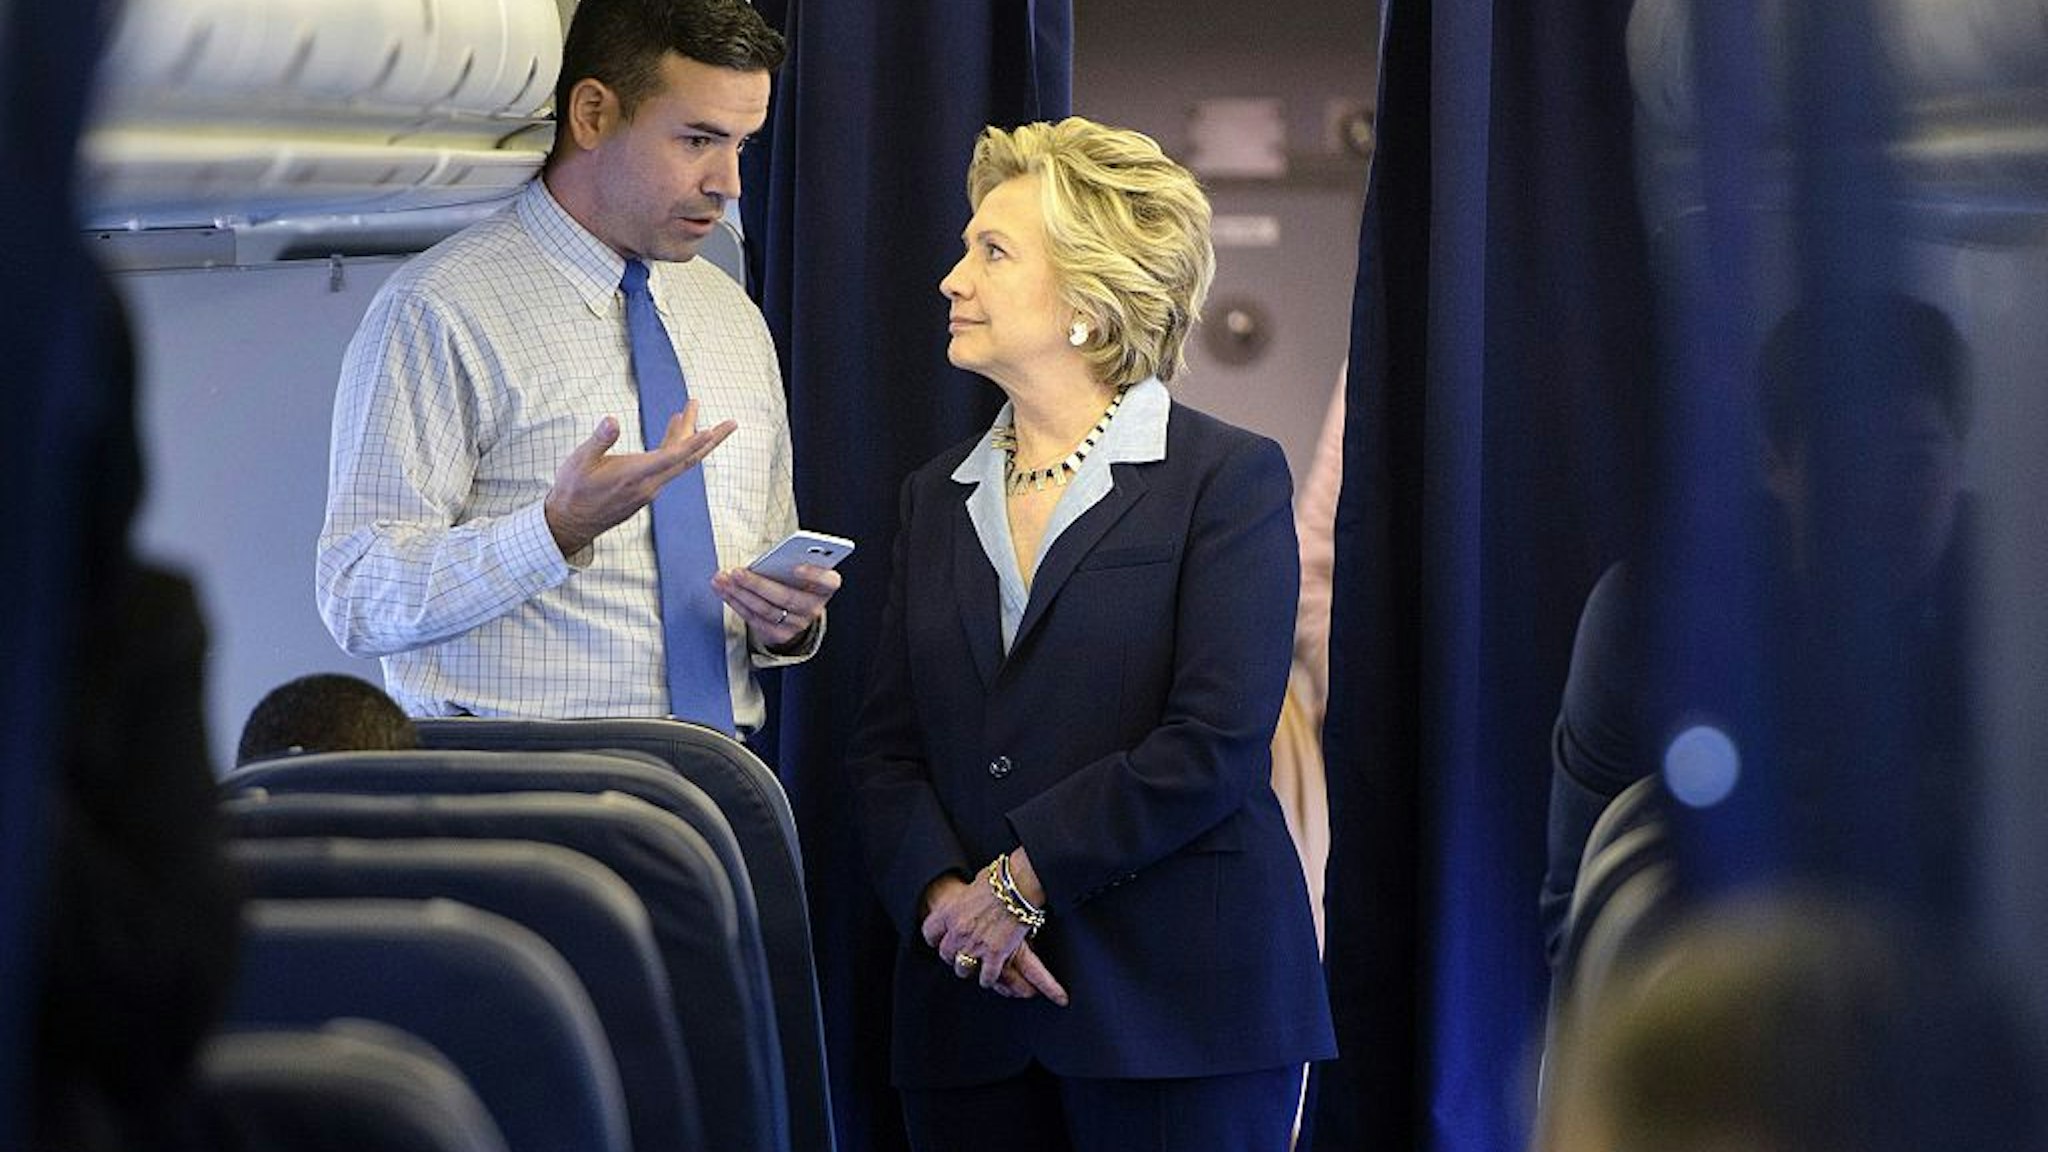 Democratic presidential nominee Hillary Clinton looks at a smart phone with national press secretary Brian Fallon on her plane at Westchester County Airport October 3, 2016 in White Plains, New York.